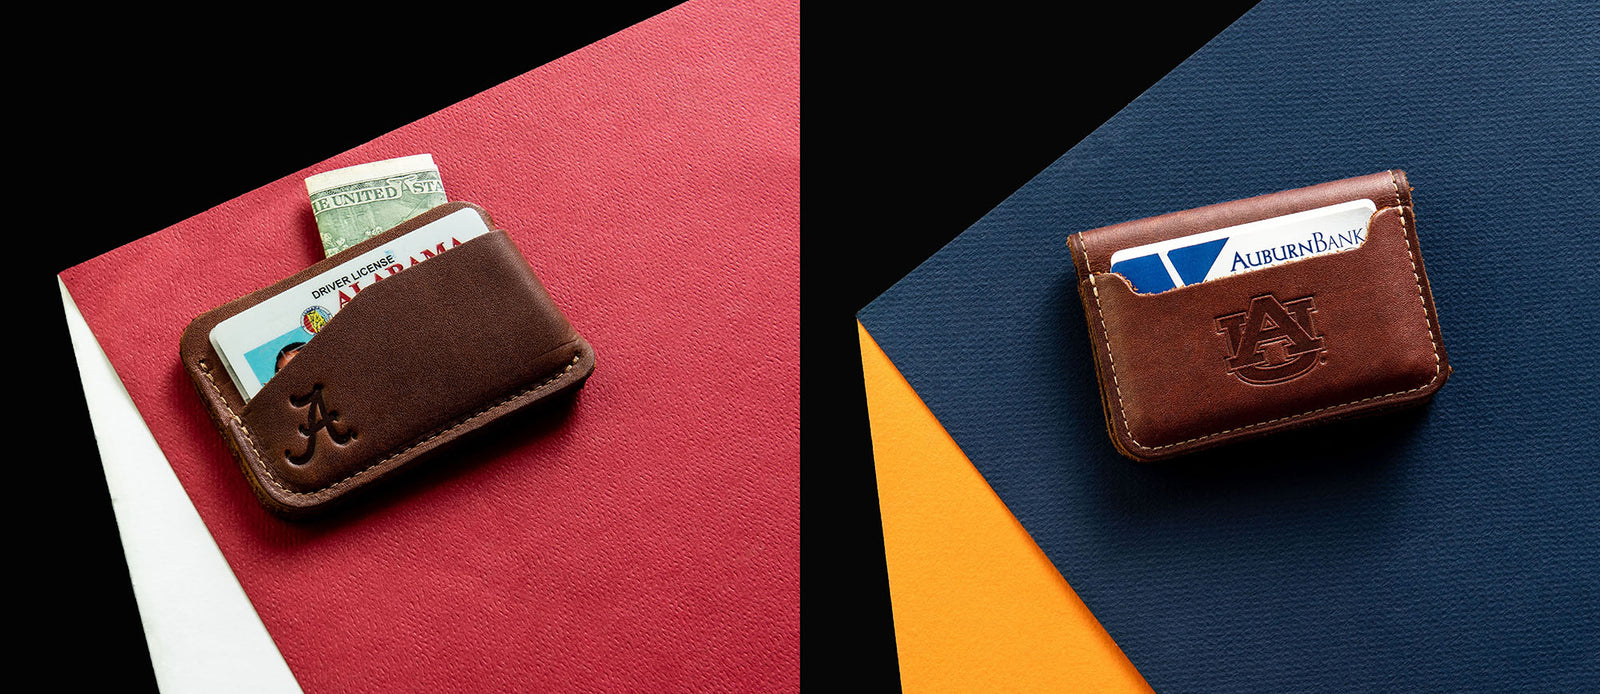 Collegiate Wallets - Holtz Leather